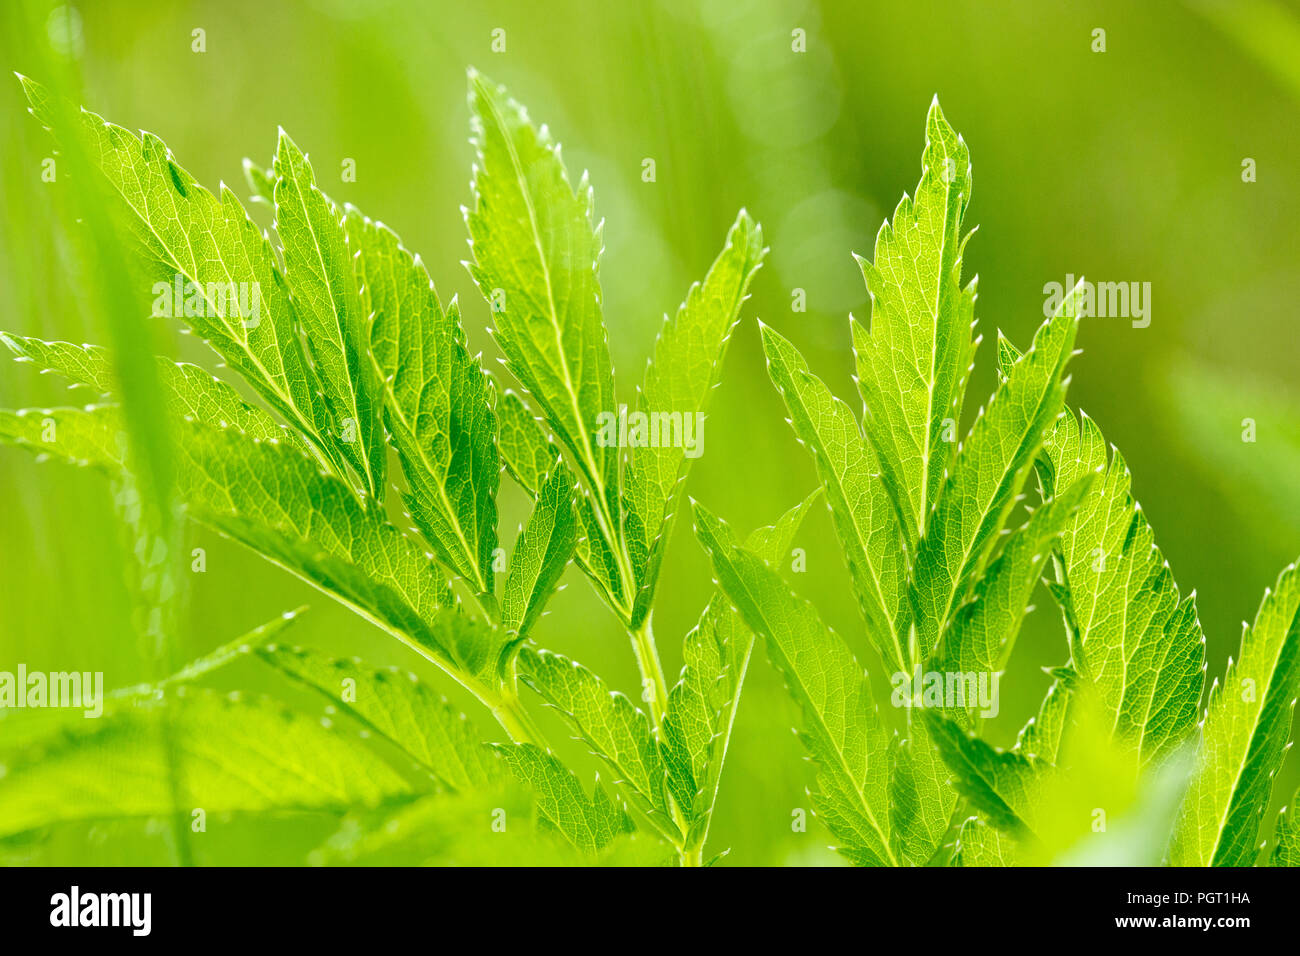 Leaves of green uncultivated plants. Blurred background. Stock Photo